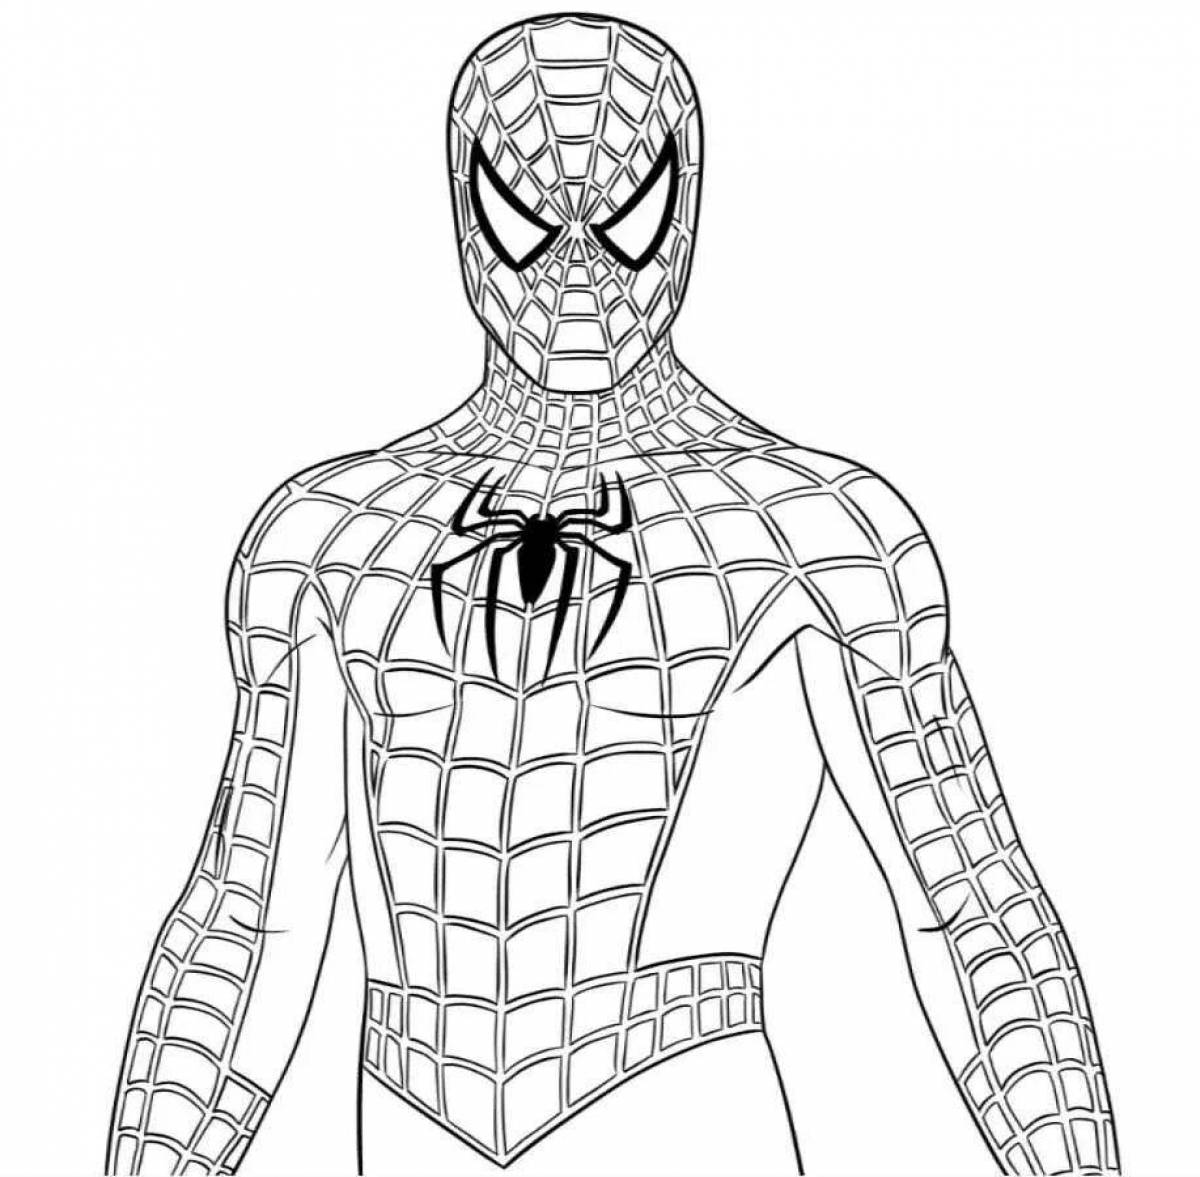 Great coloring page of spiderman